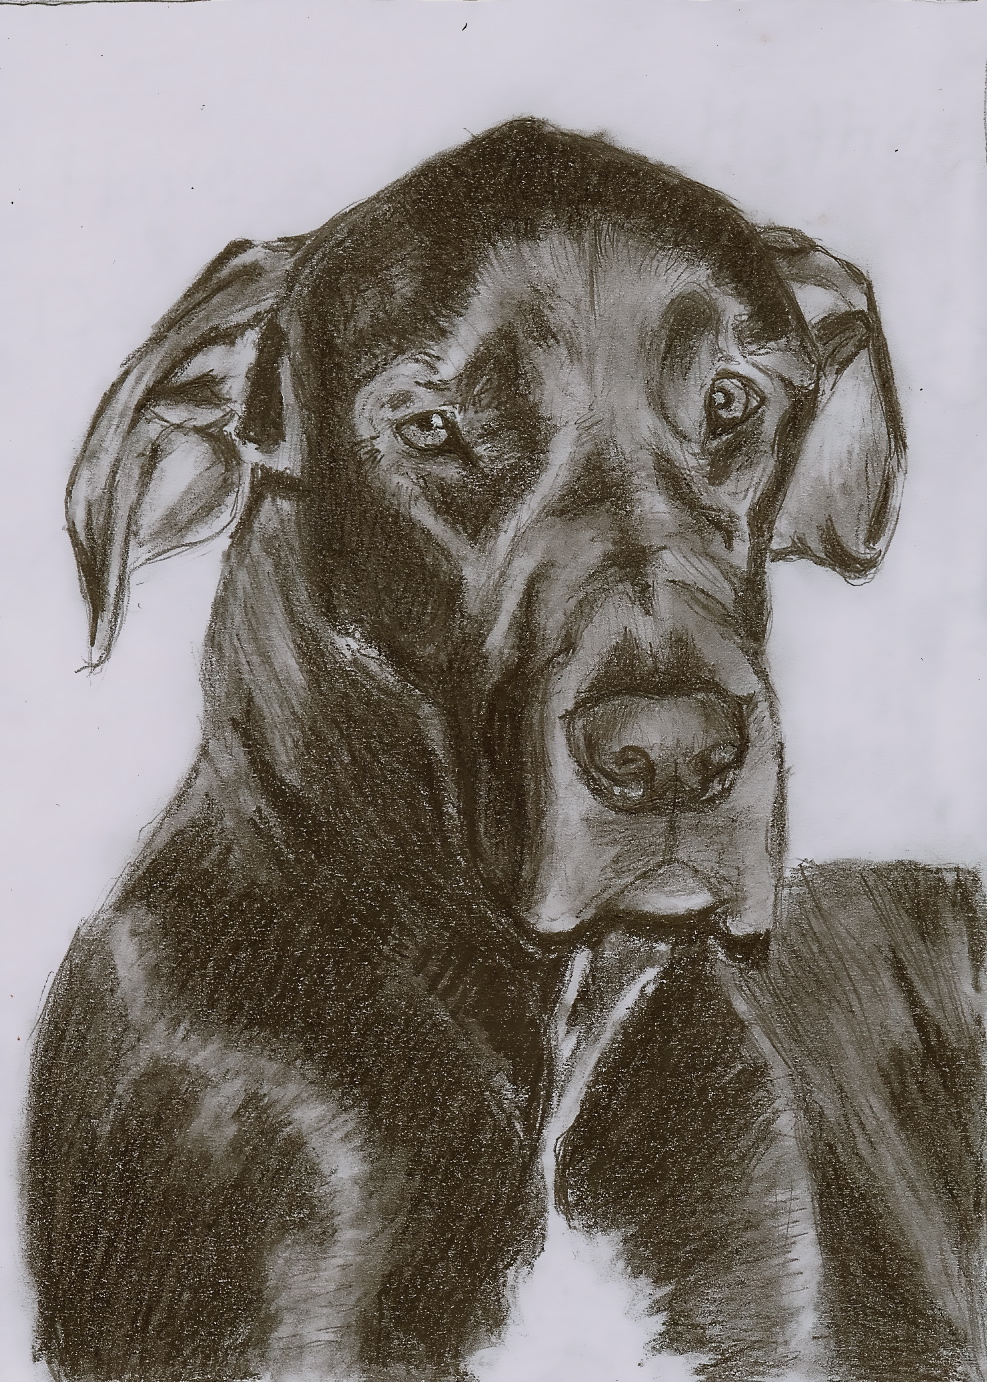 Sketch of my Great Dane by ChristianCowgirl116 on DeviantArt